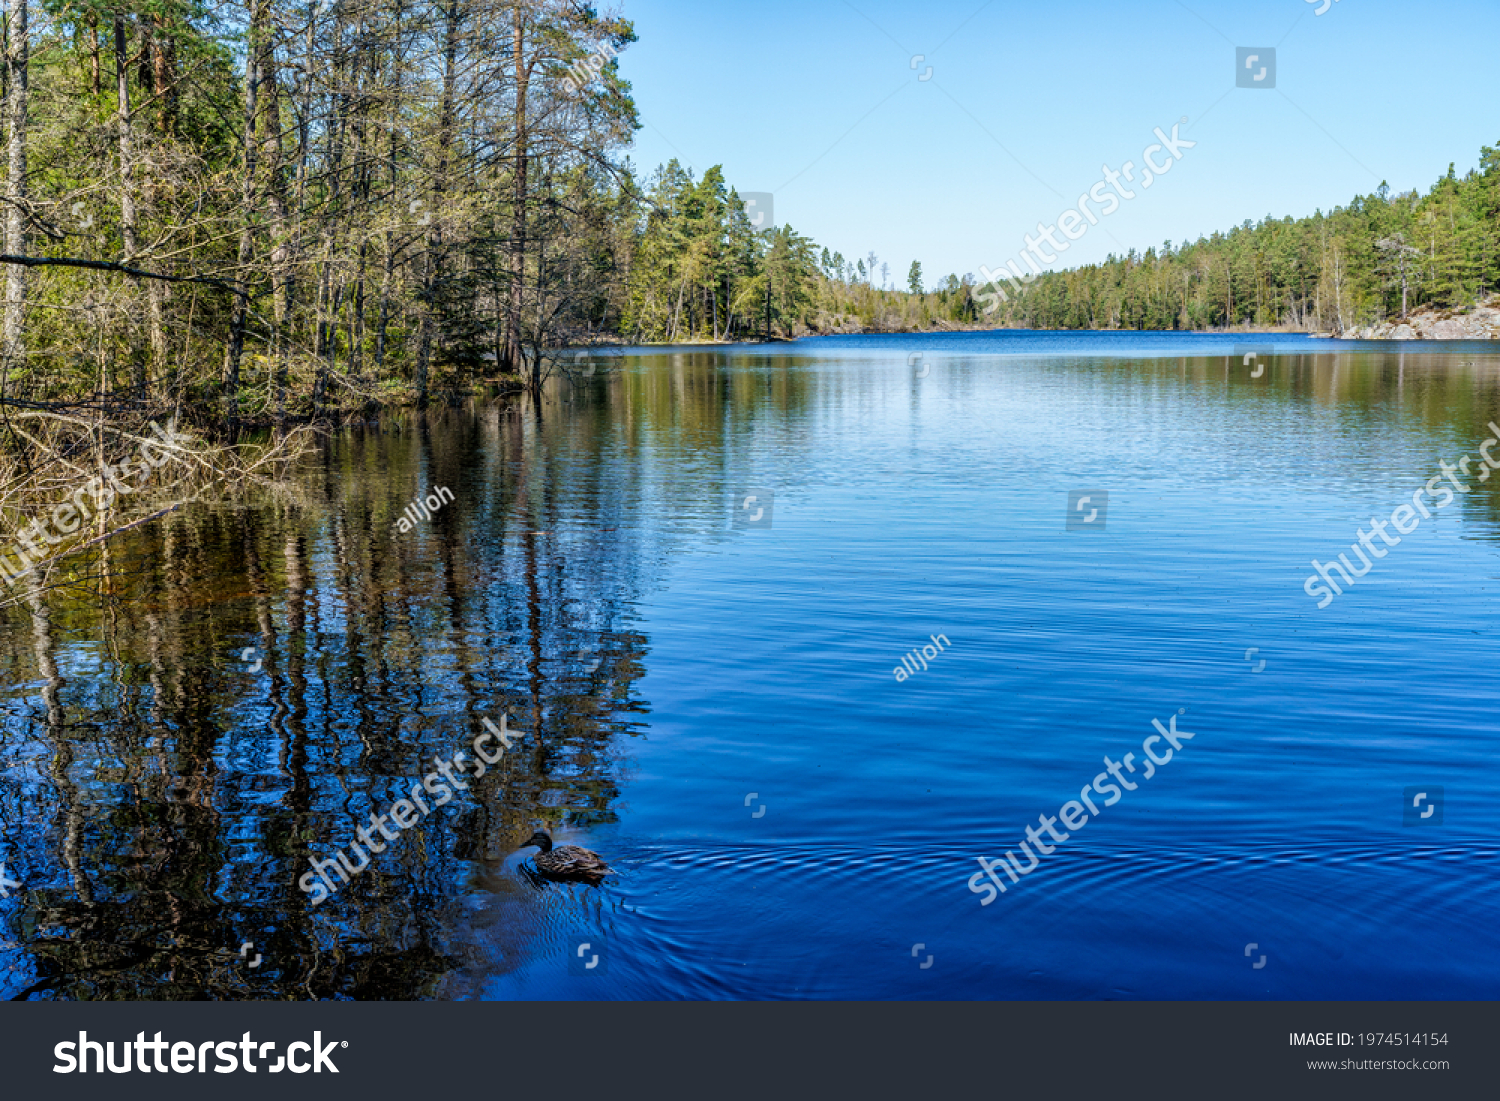 A nice image of a forest lake in Tyresta National Park, Sweden #1974514154